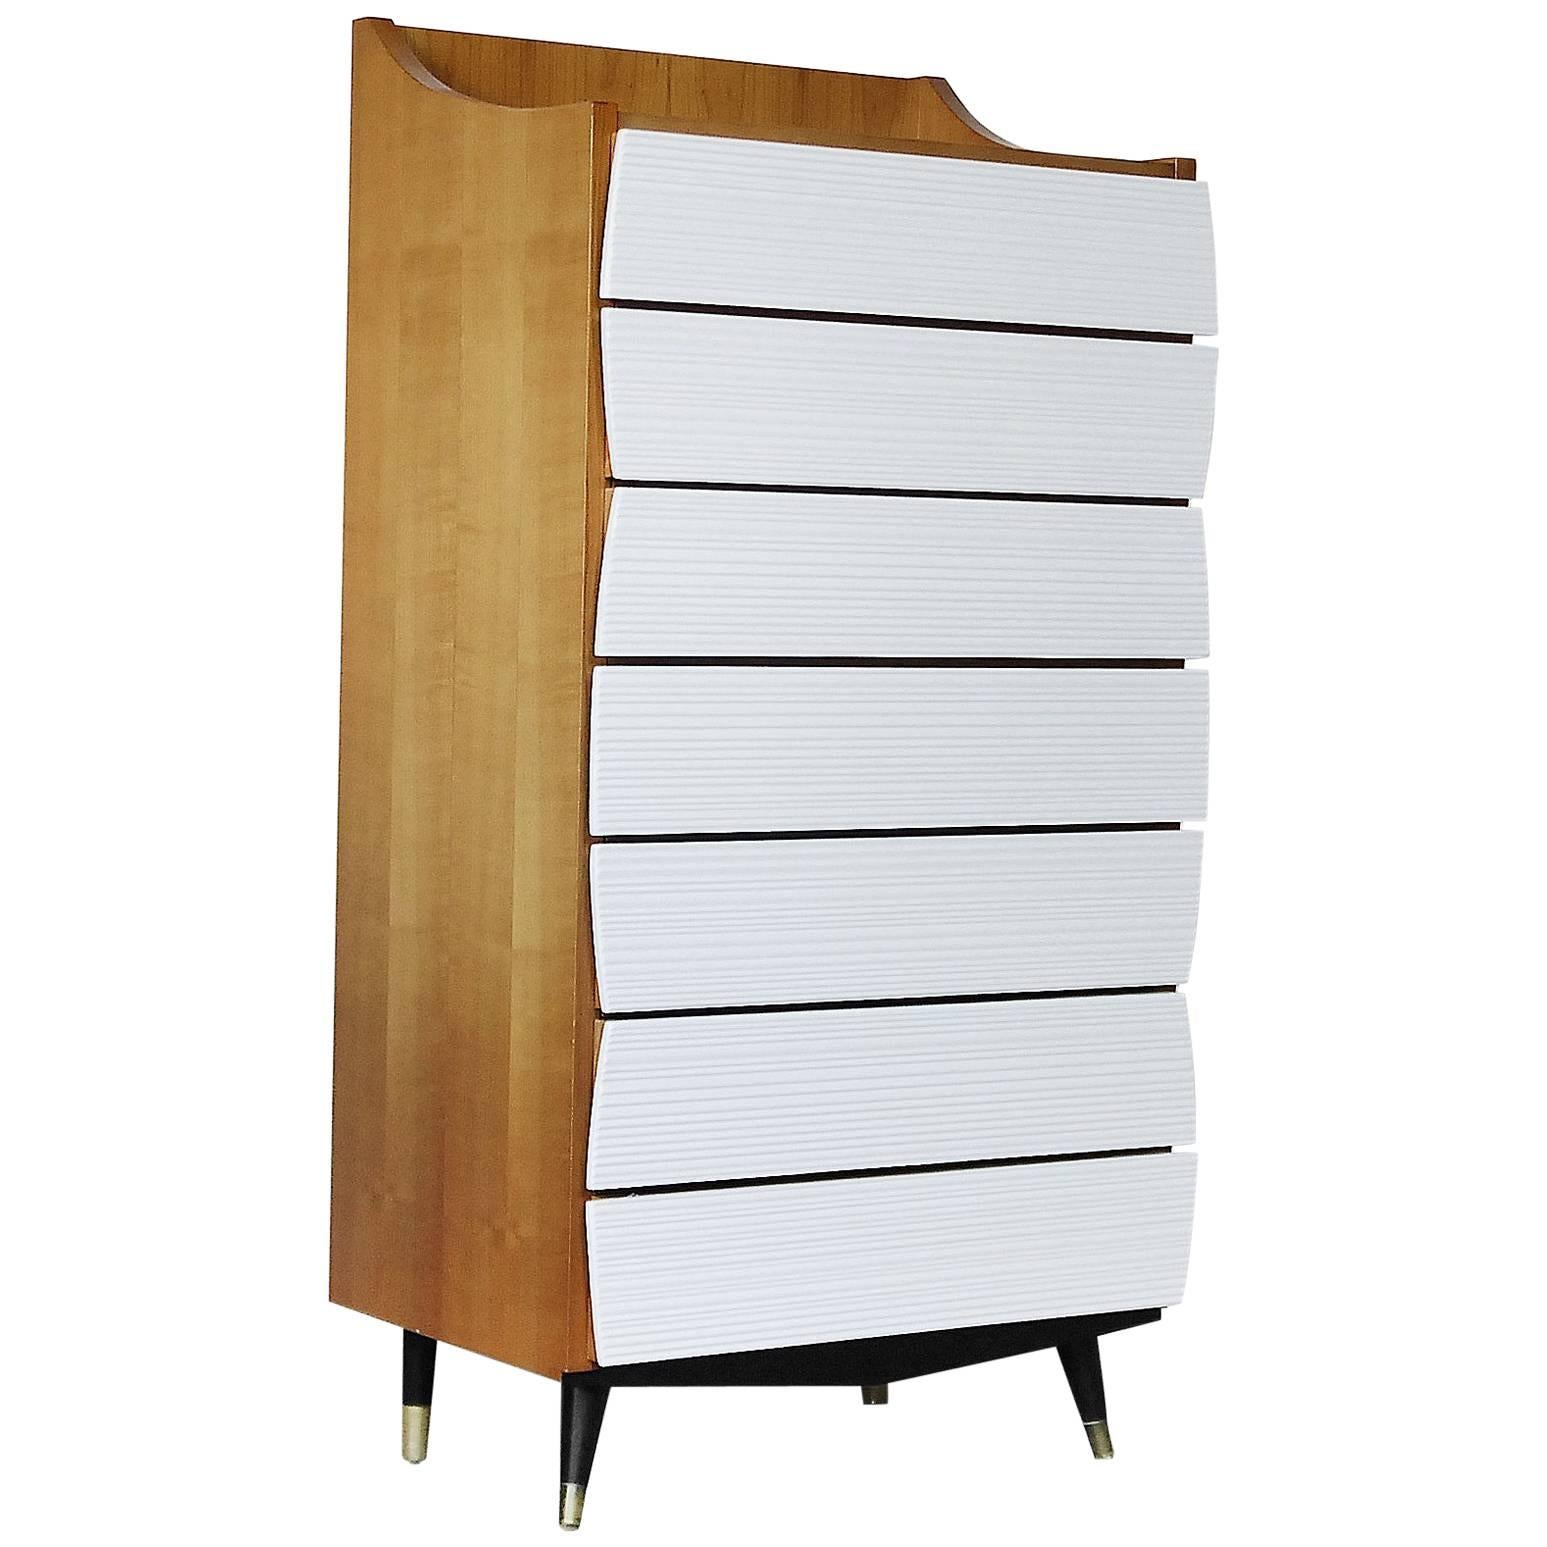 Scandinavian Modern Tall Chest with Drawers, 1970s